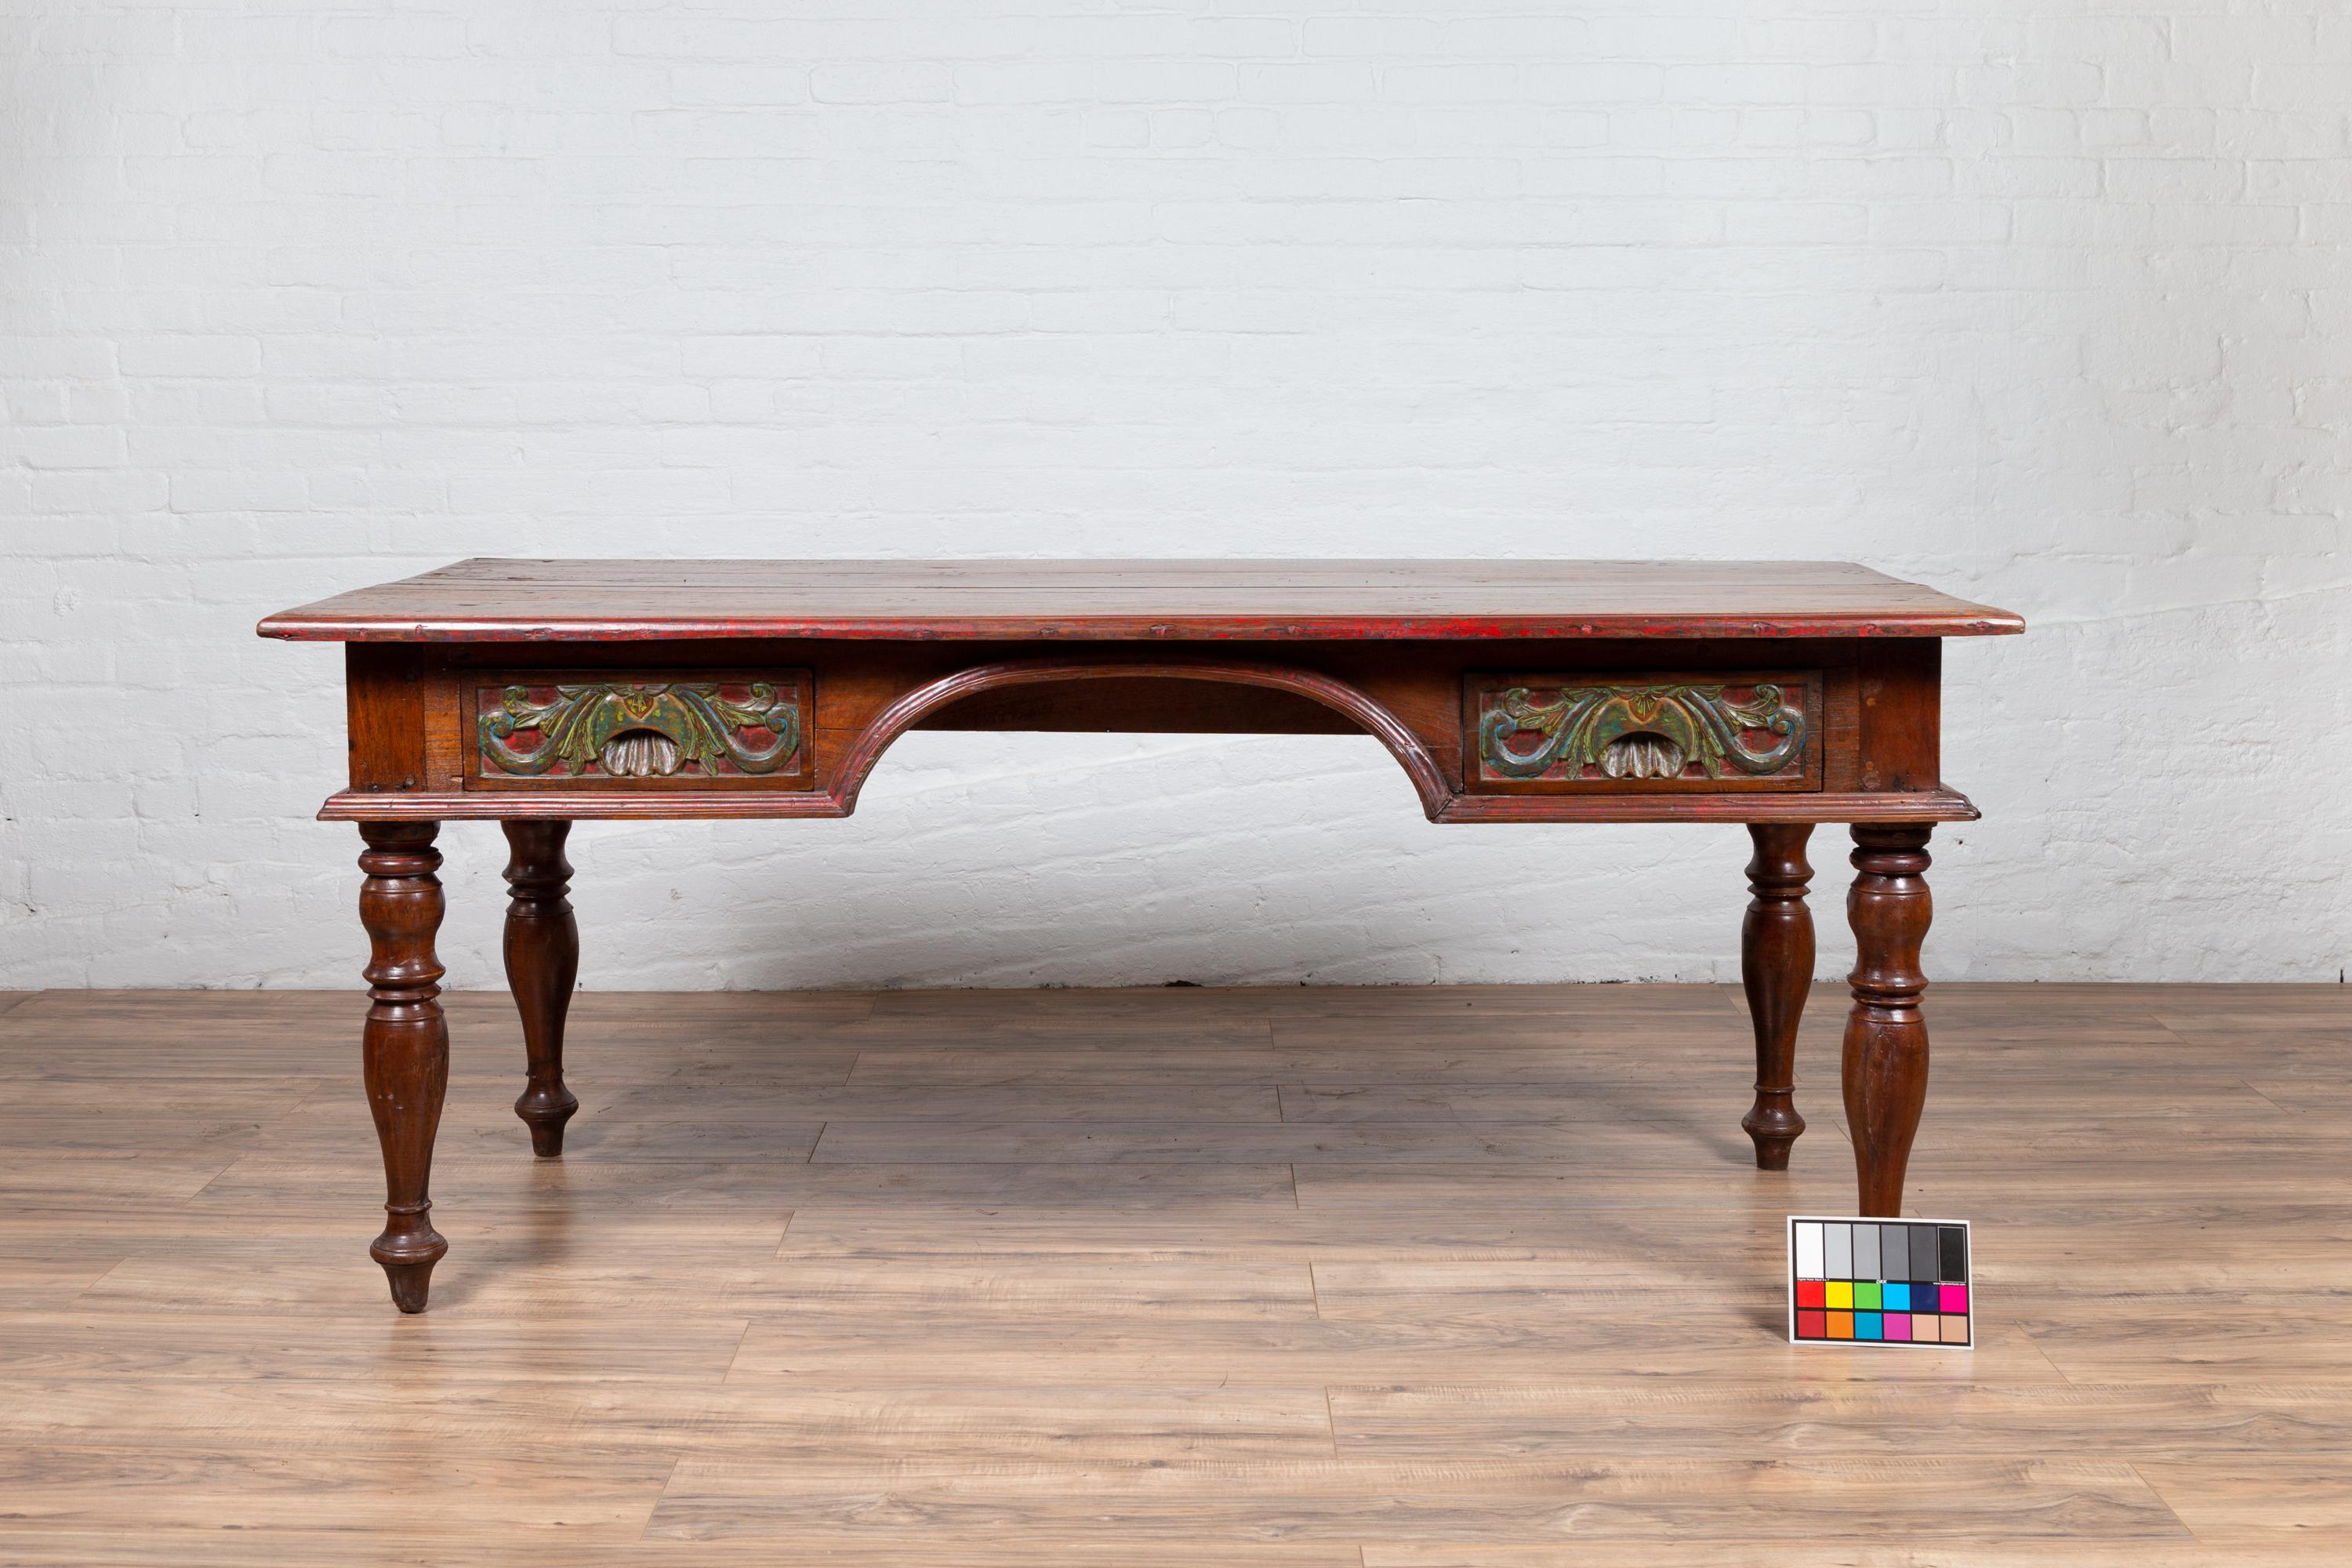 Antique Javanese Kneehole Desk with Polychrome Finish, Drawers and Carved Decor 15